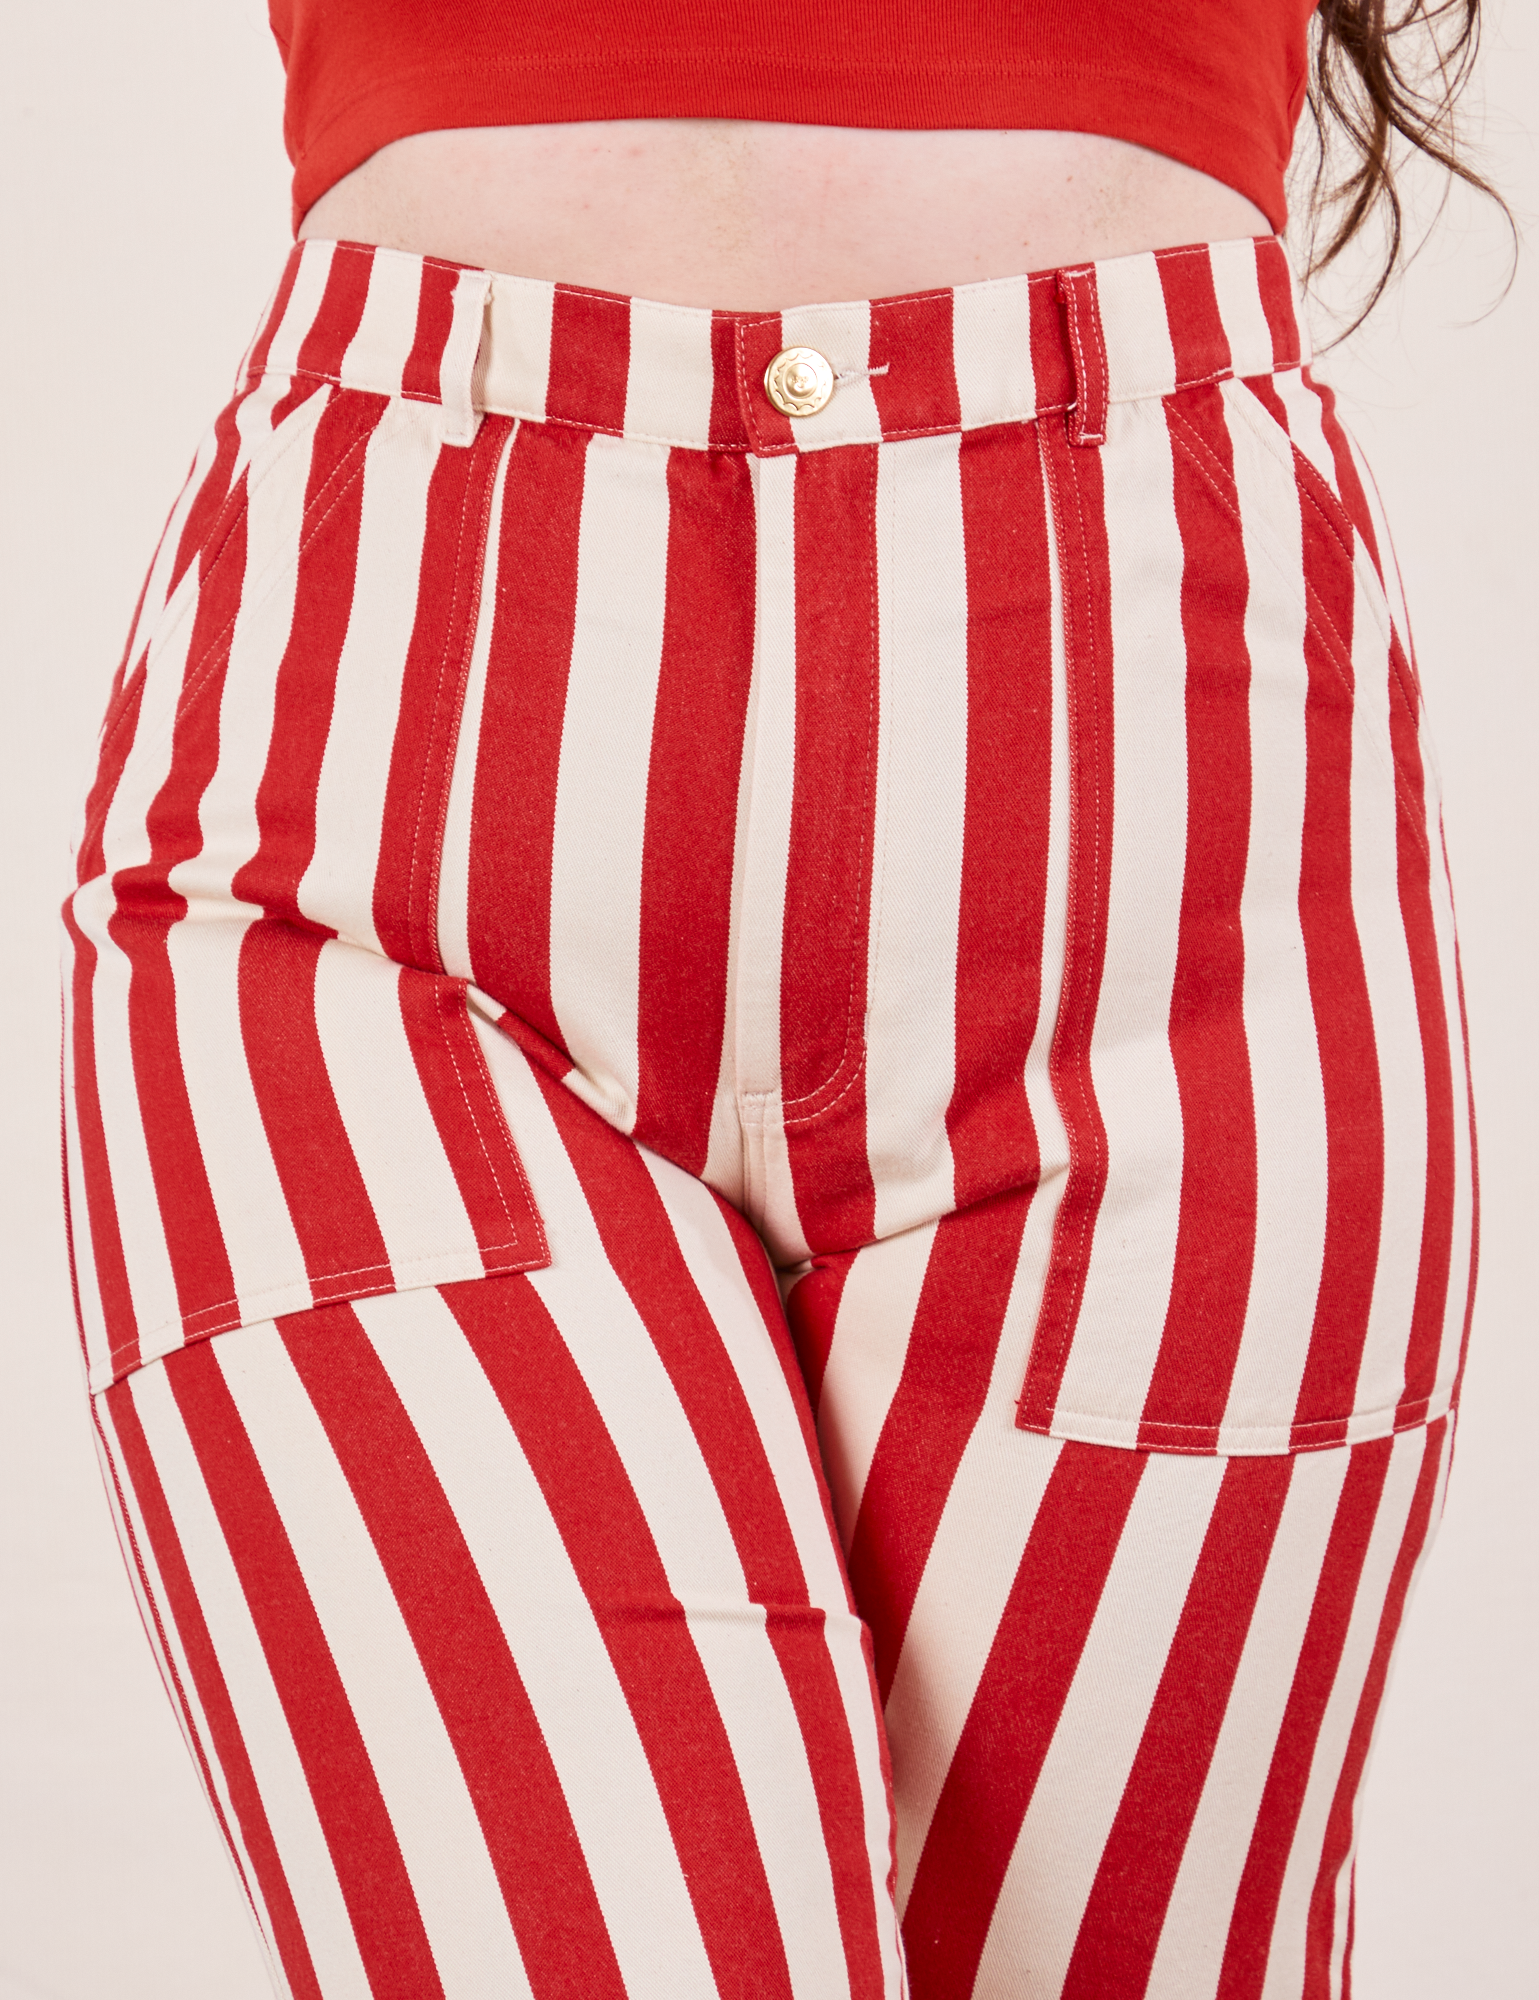 Work Pants in Cherry Stripe front close up on Sydney